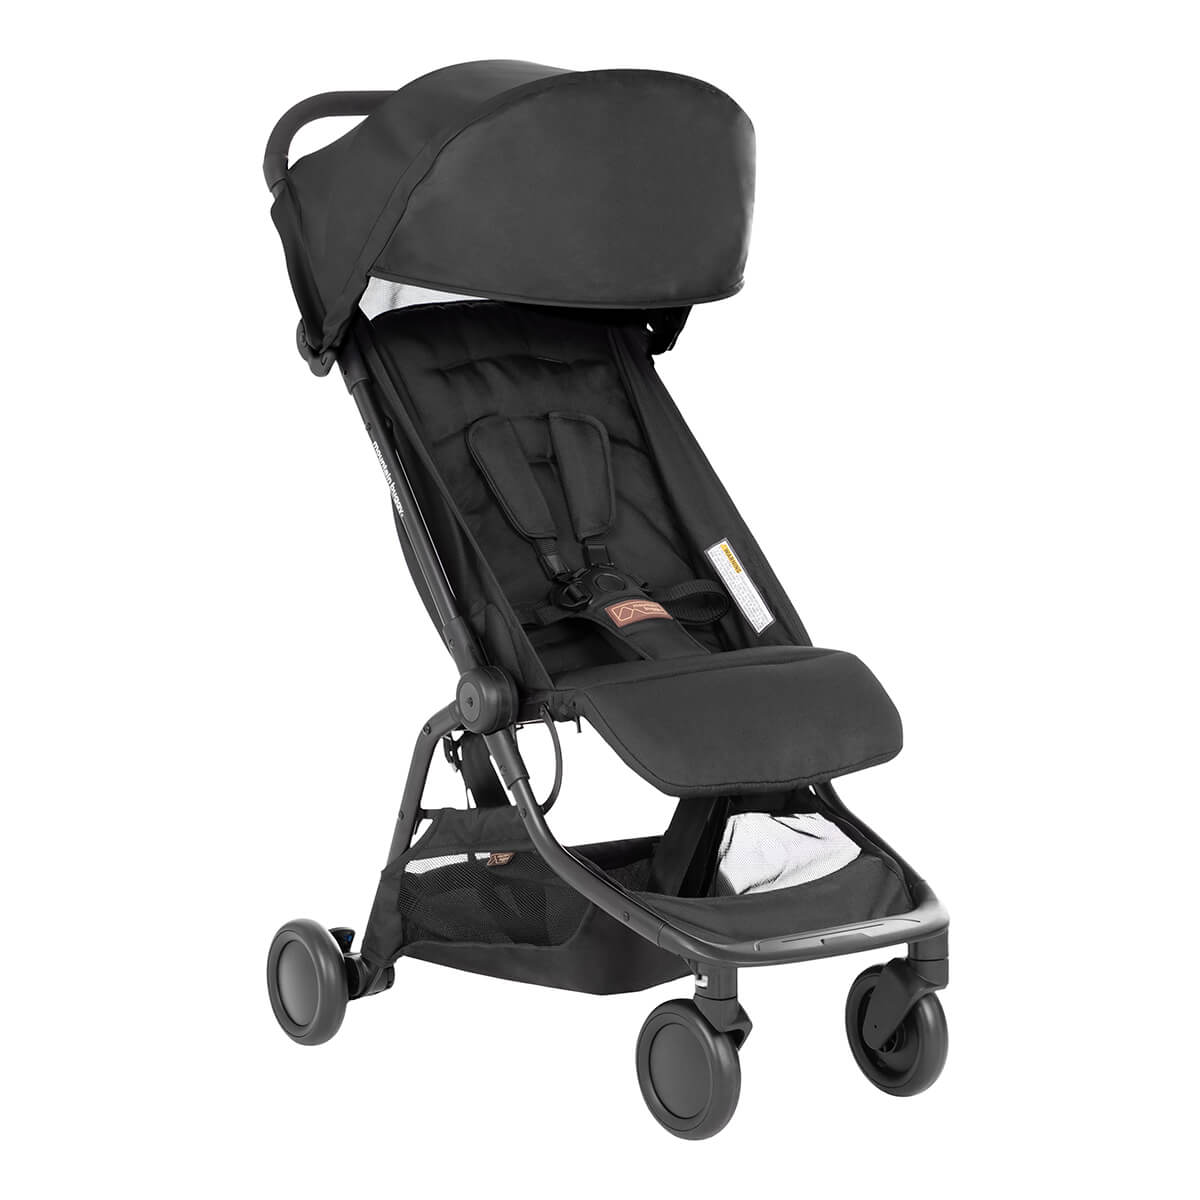 Compact and Travel Strollers